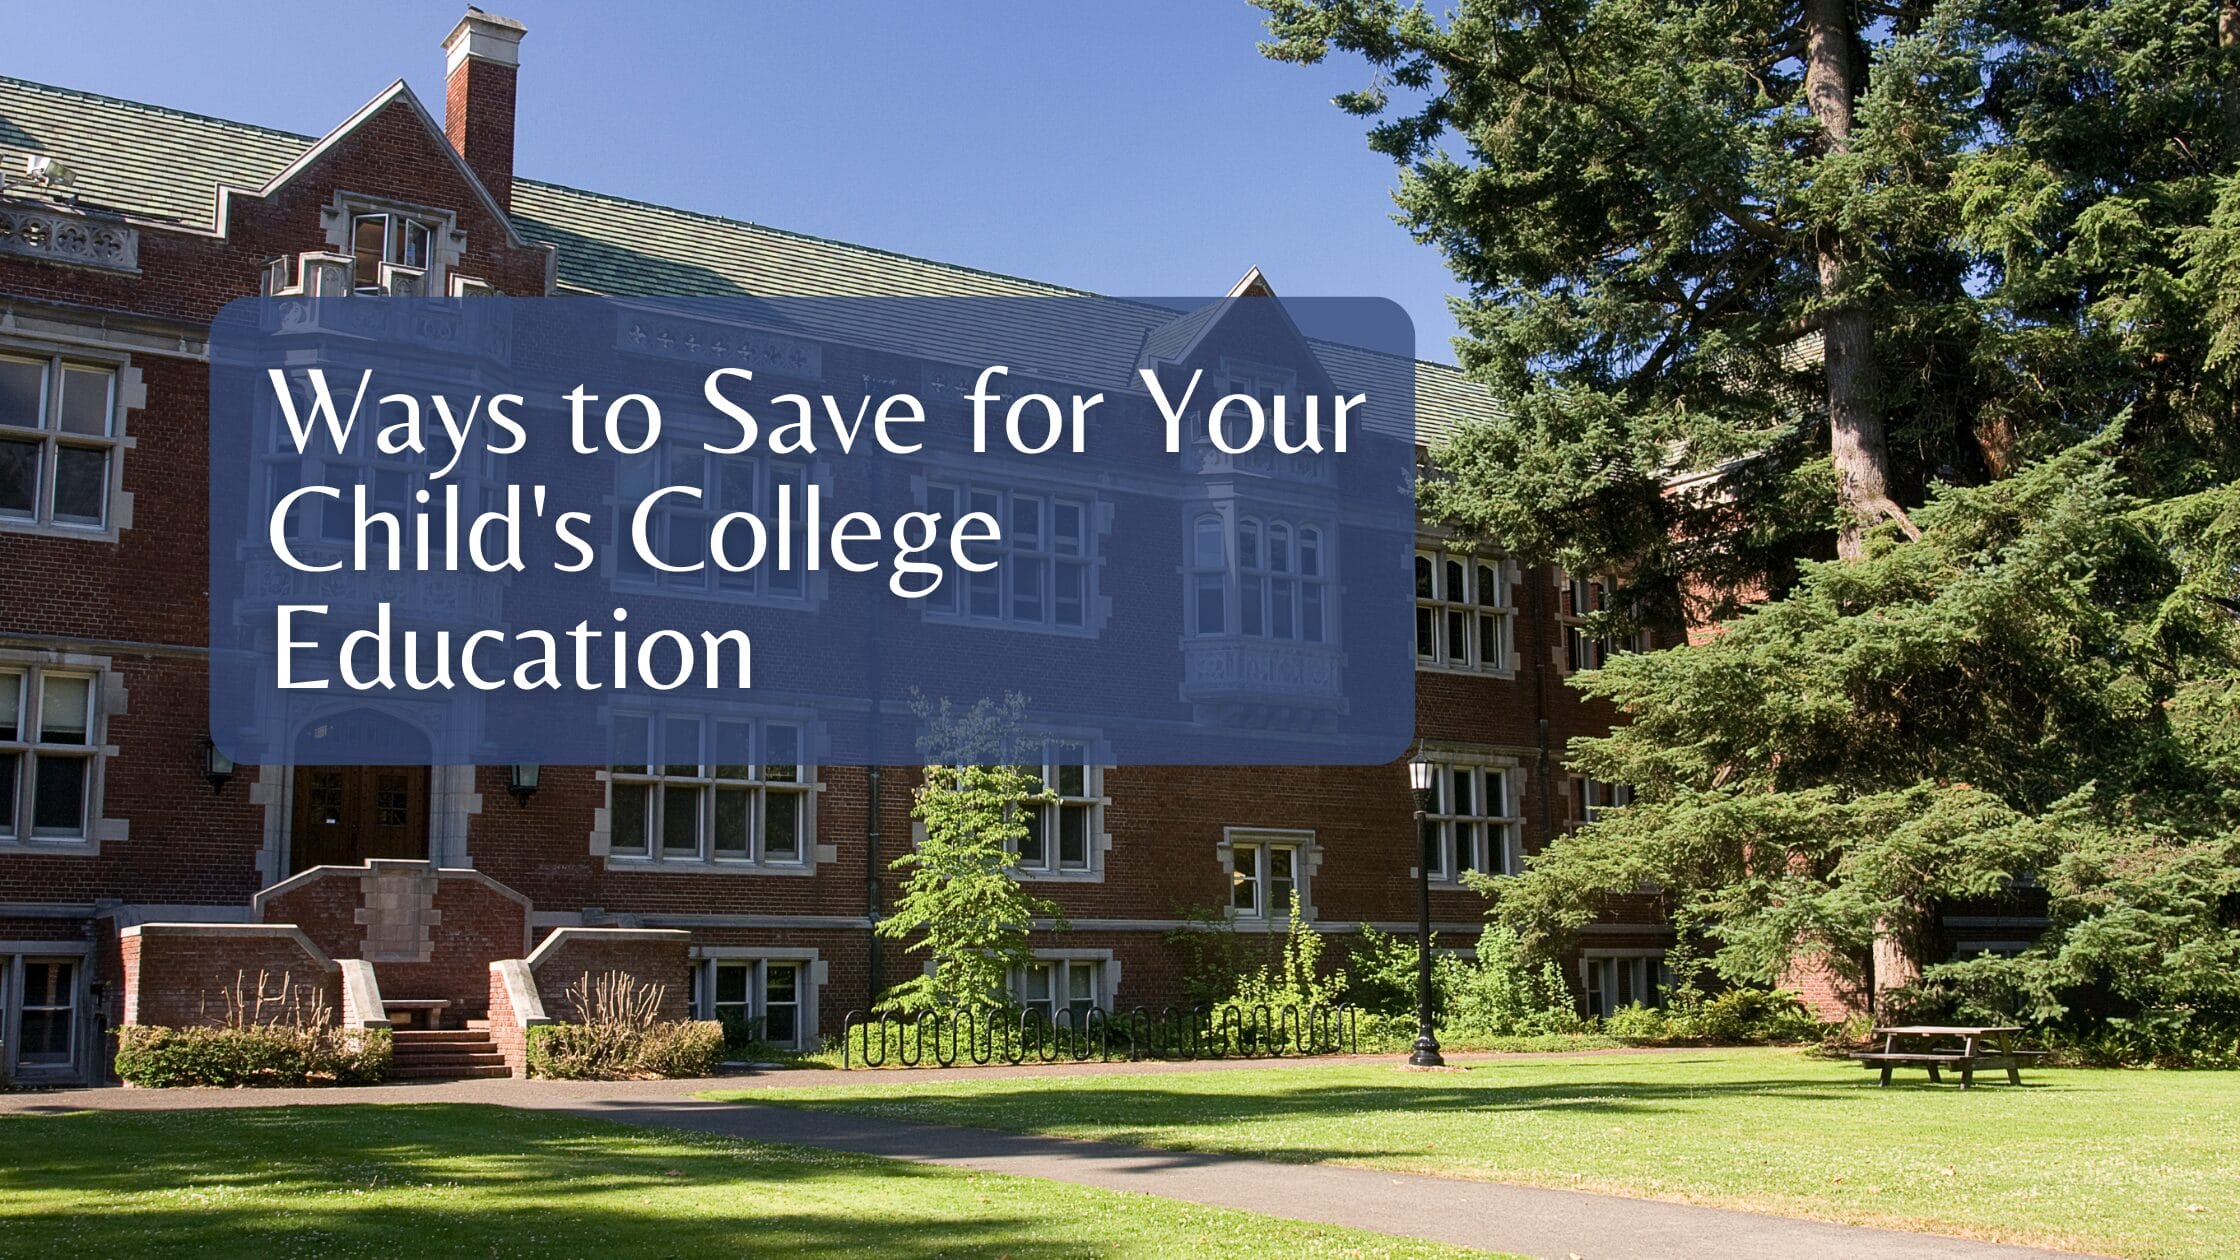 Ways to Save for Your Child's College Education